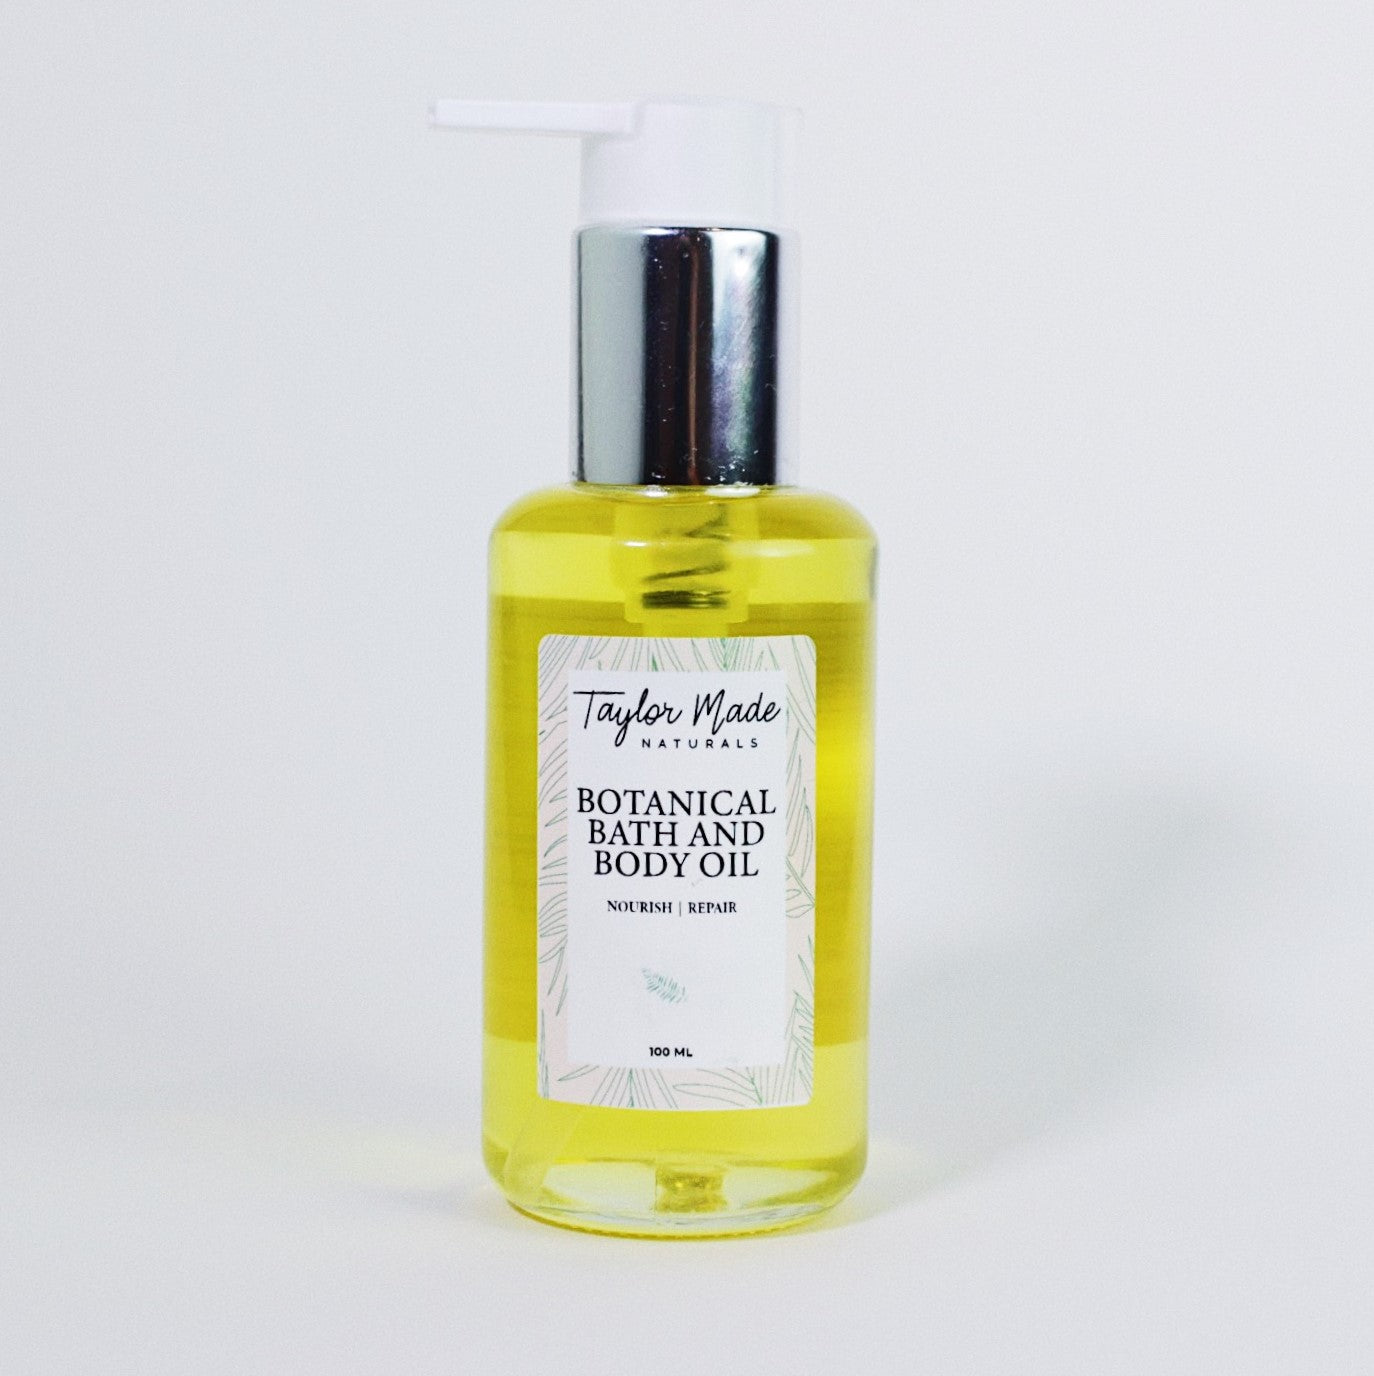 Botanical body oil is a plant based power house formulated to nourish and repair the skin. Suitable for all skin types including sensitive skin , dry skin and aging skin. 